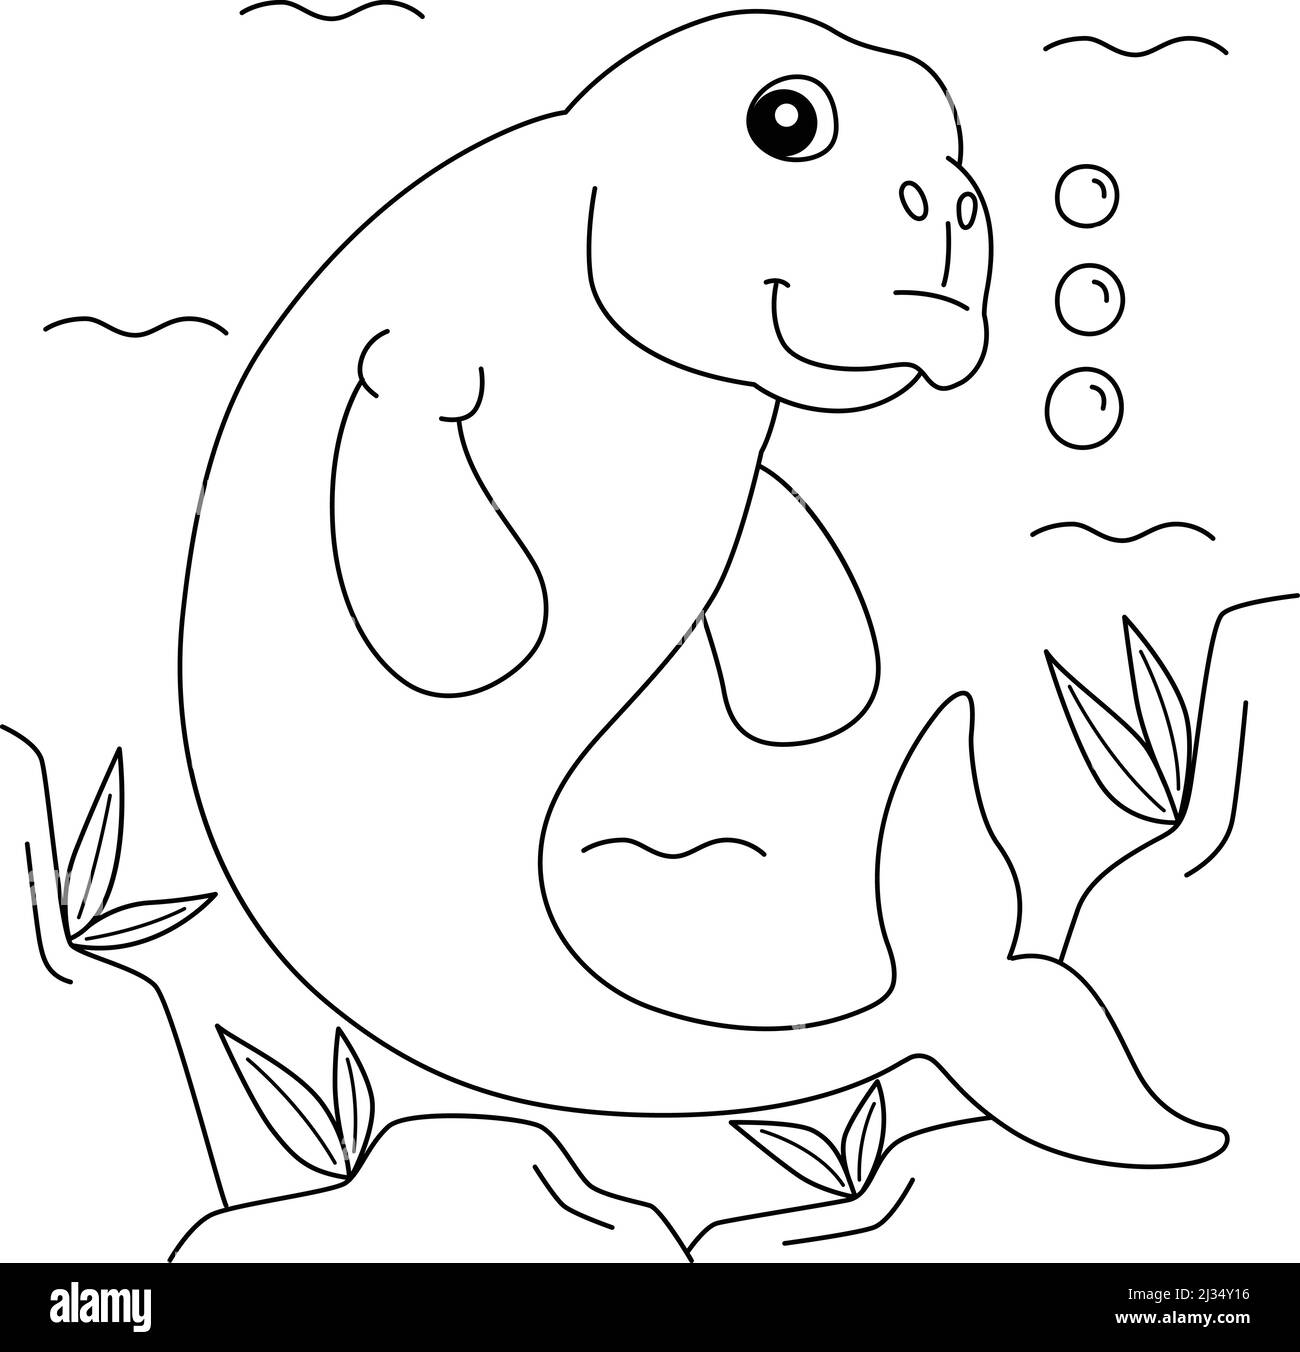 Dugong animal coloring page for kids stock vector image art